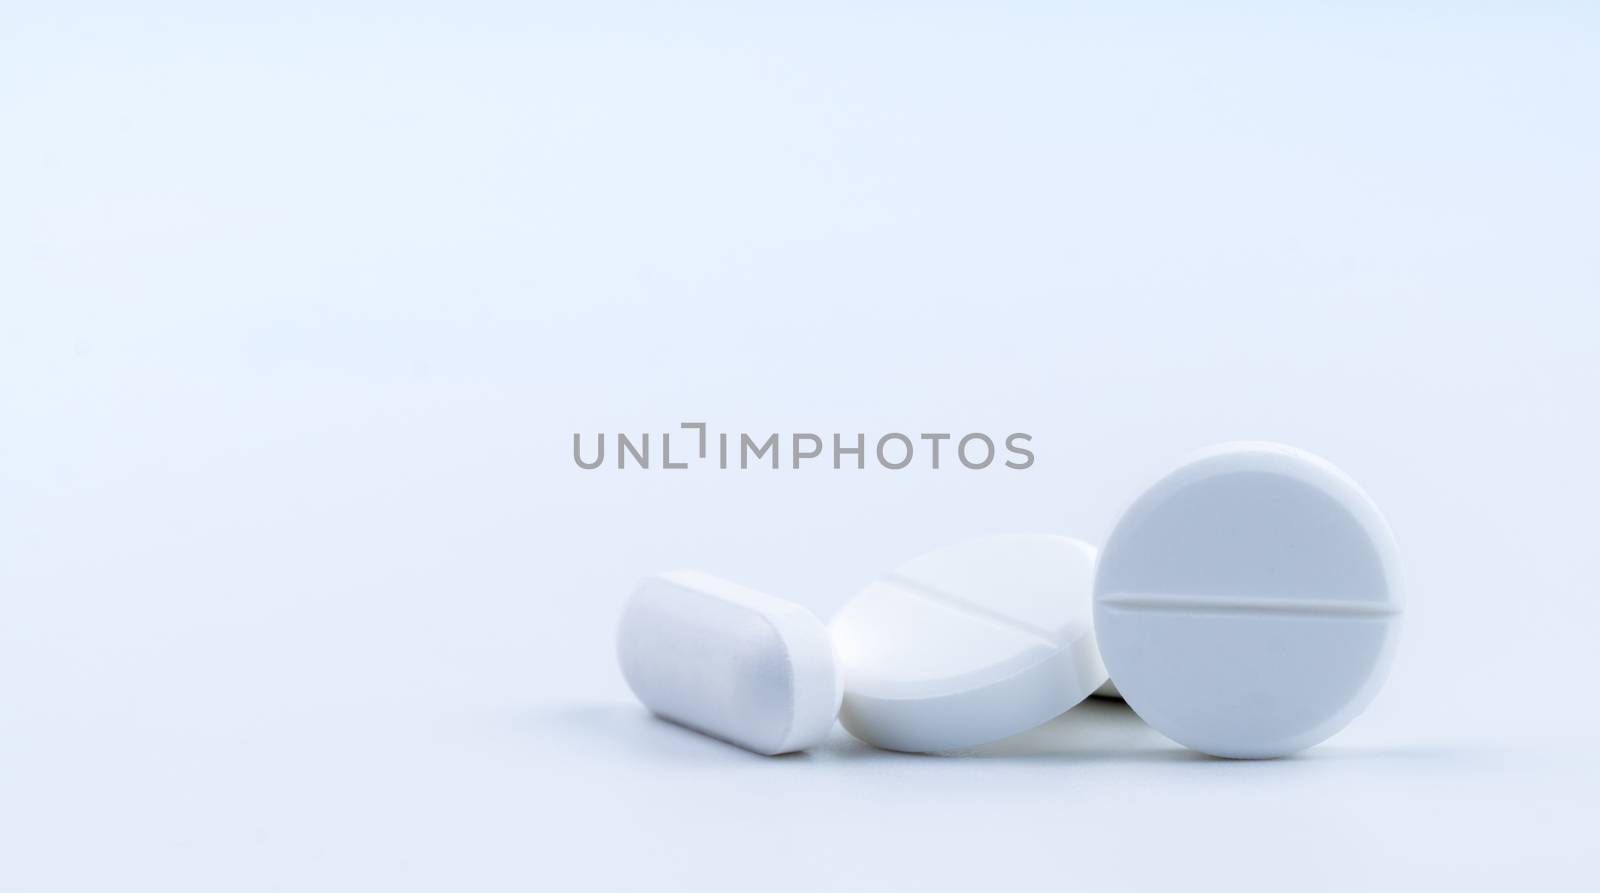 Pile of white round and oblong shape tablet pills isolated on white background. Pharmaceutical industry. Pharmacy or drugstore sign and symbol. Global healthcare concept. Health and pharmacology.